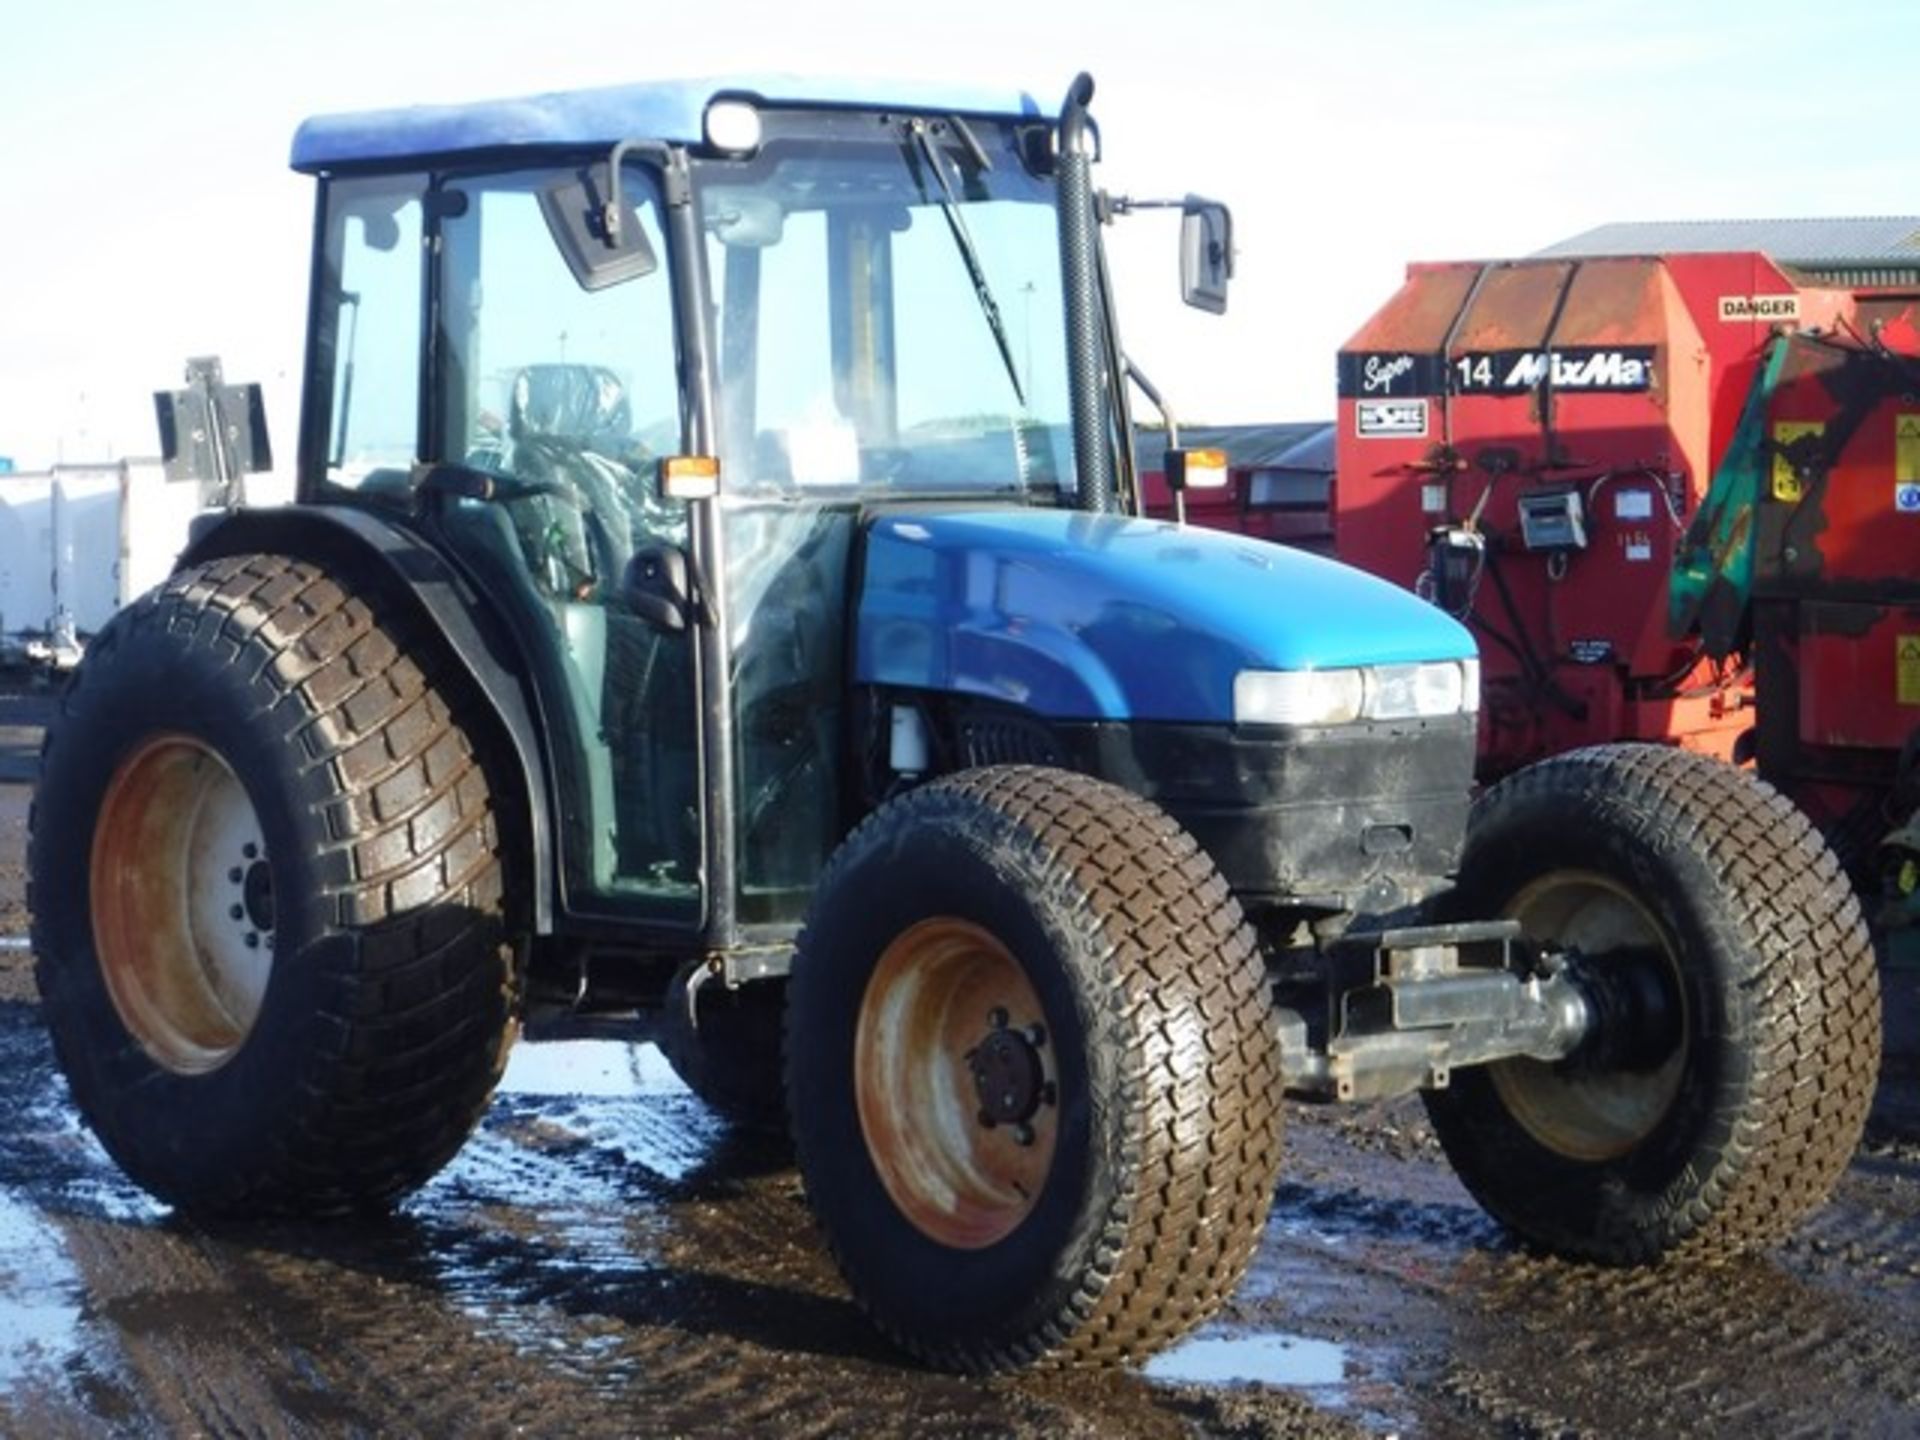 NEW HOLLAND TRACTOR C/W REAR PTO 1727HRS (CORRECT) REG - AW02AUT YEAR 2002 - Image 3 of 19